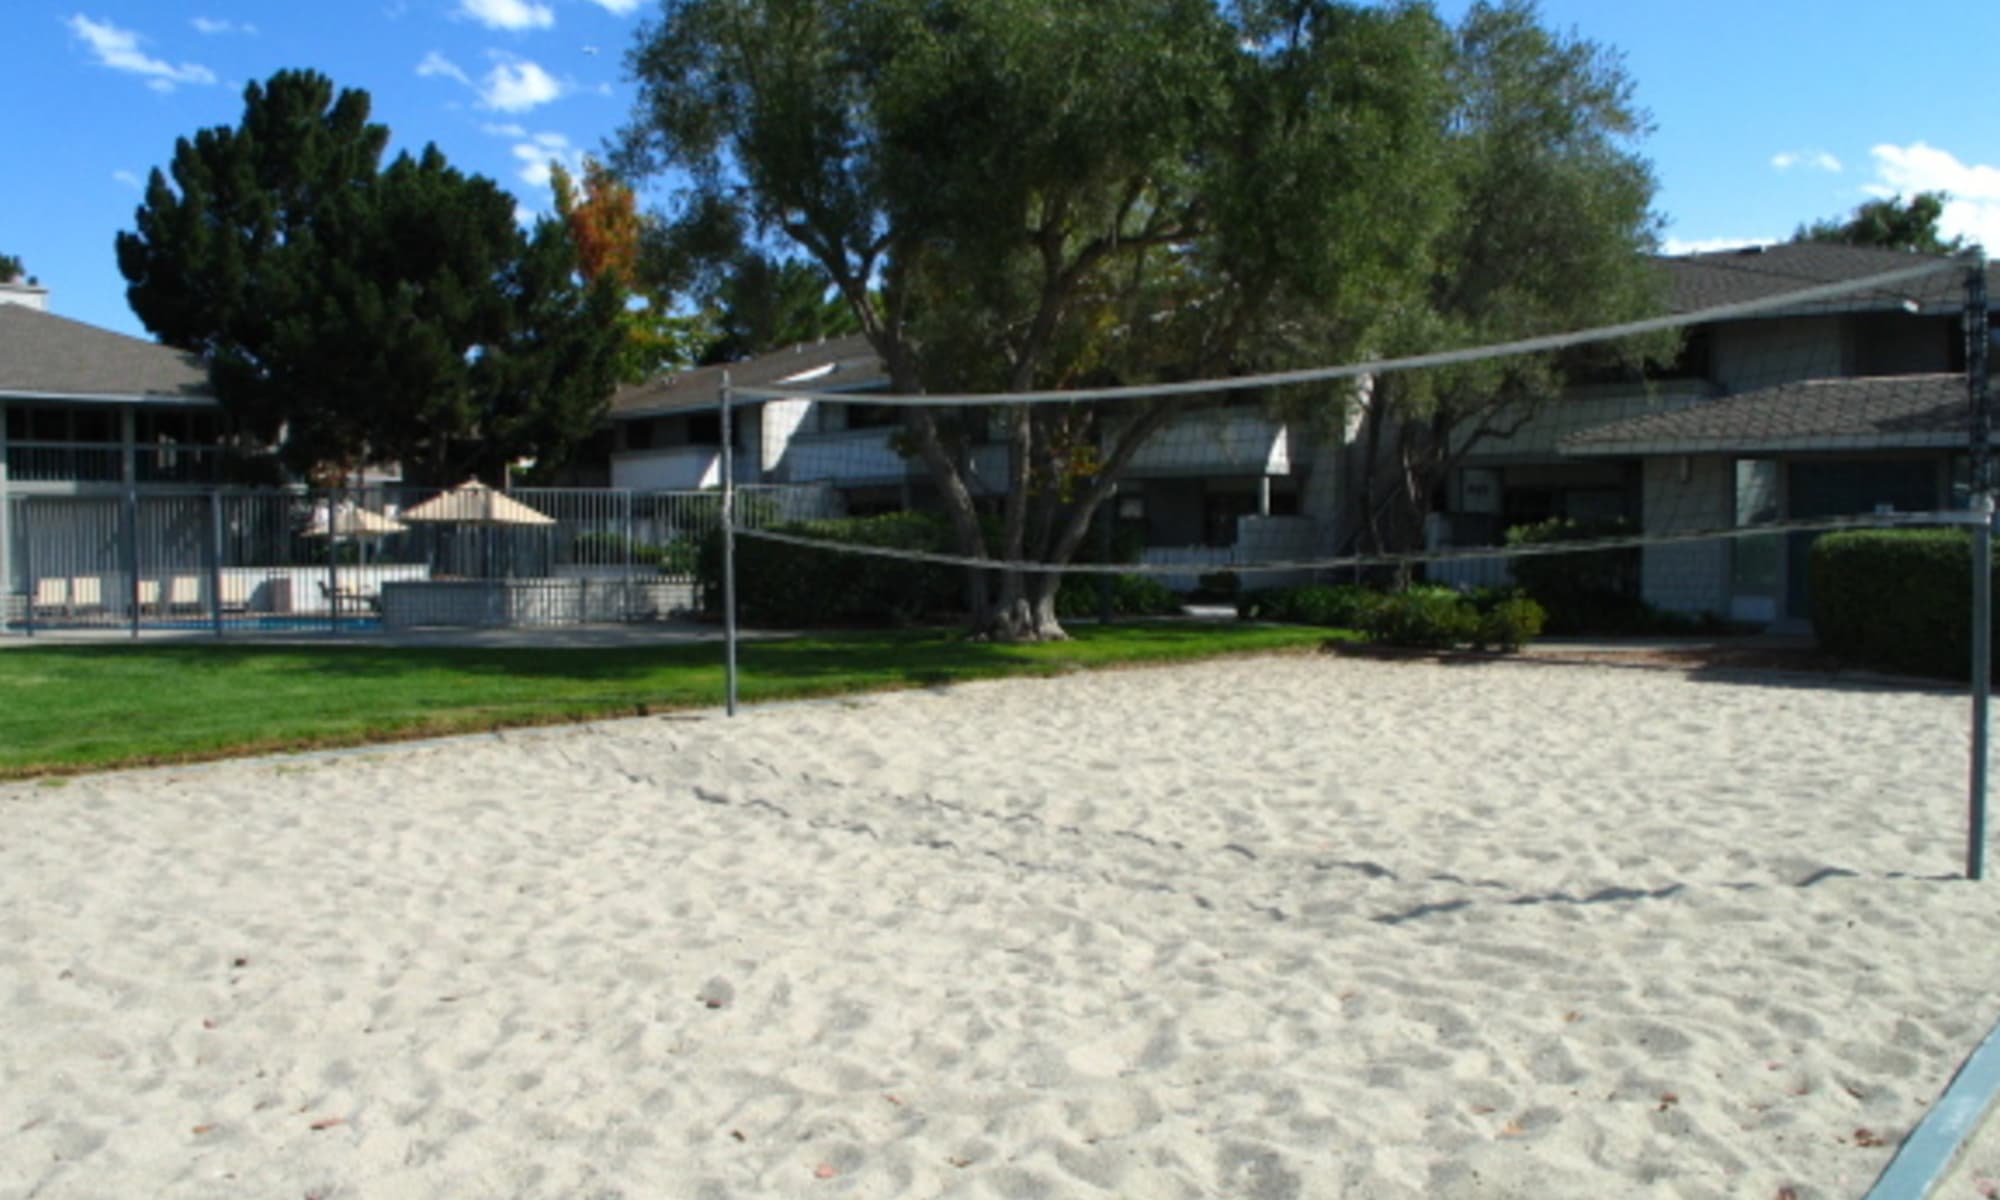 San volleyball pit at Beach Cove in Foster City, California